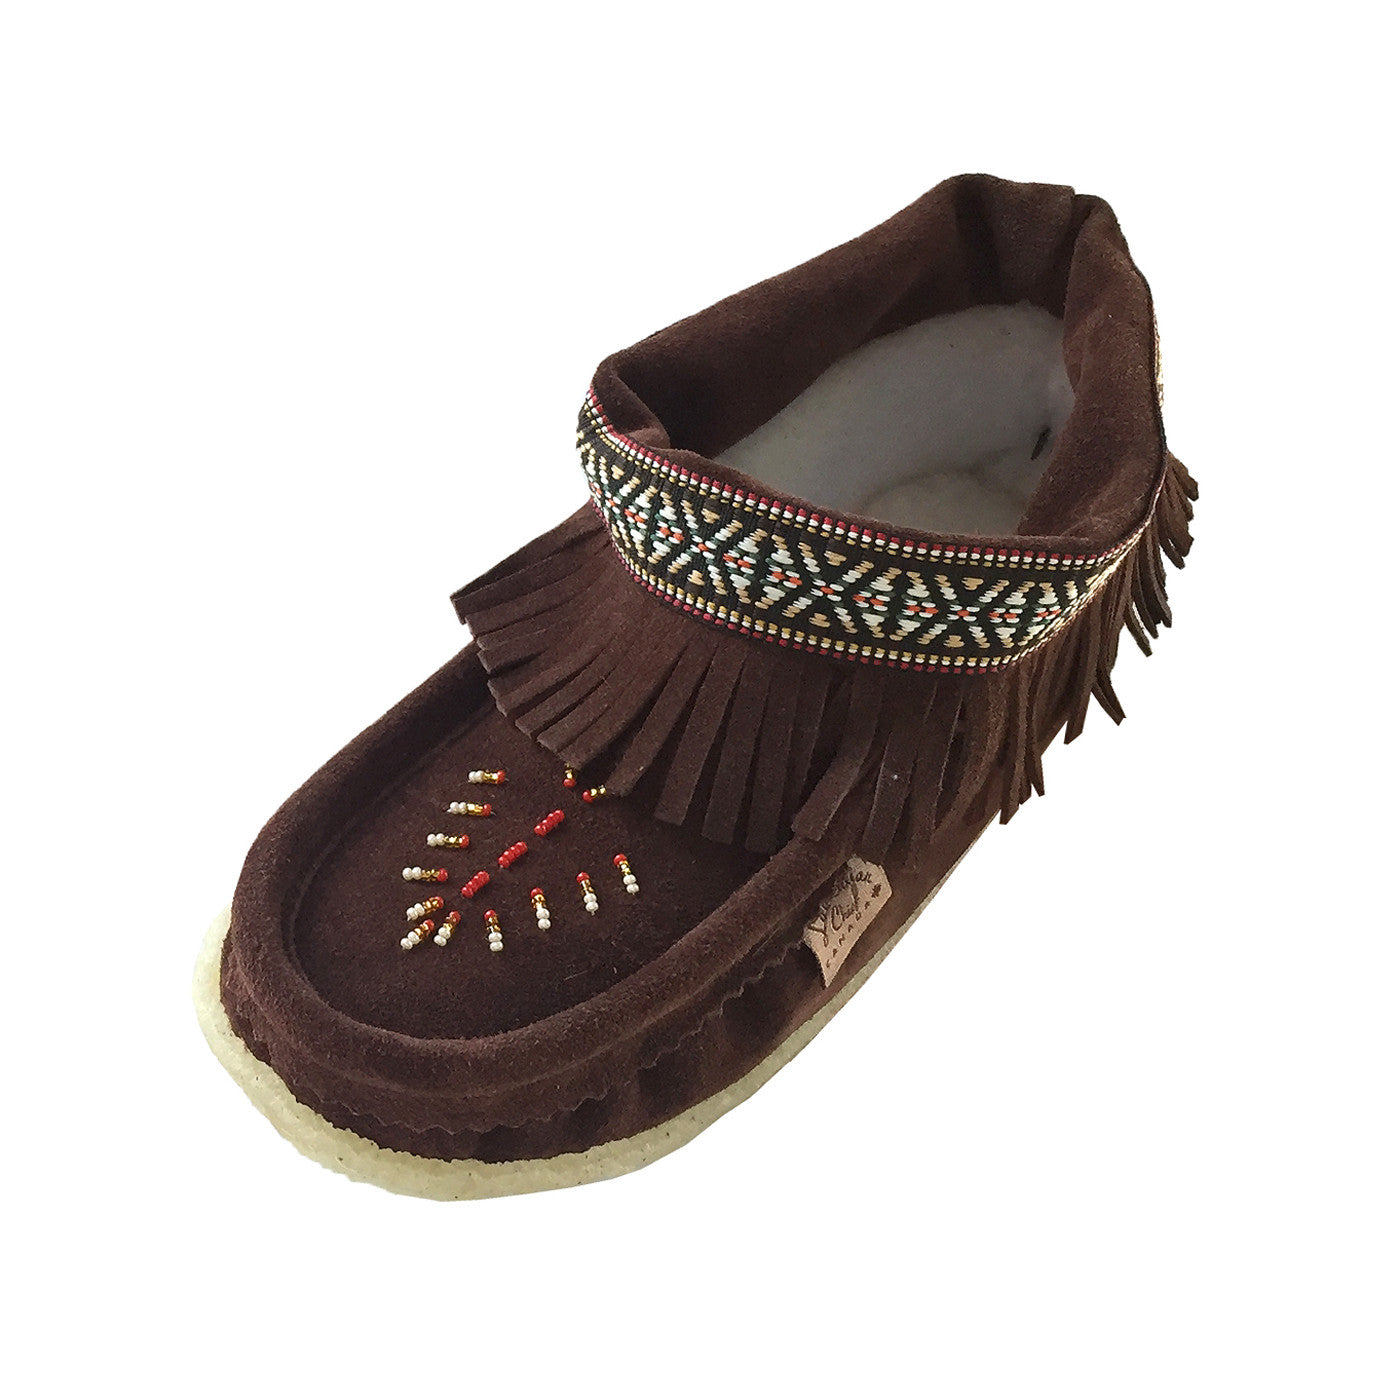 Women's Beaded & Fringed Fleece Genuine Suede Moccasins Slippers – Leather-Moccasins